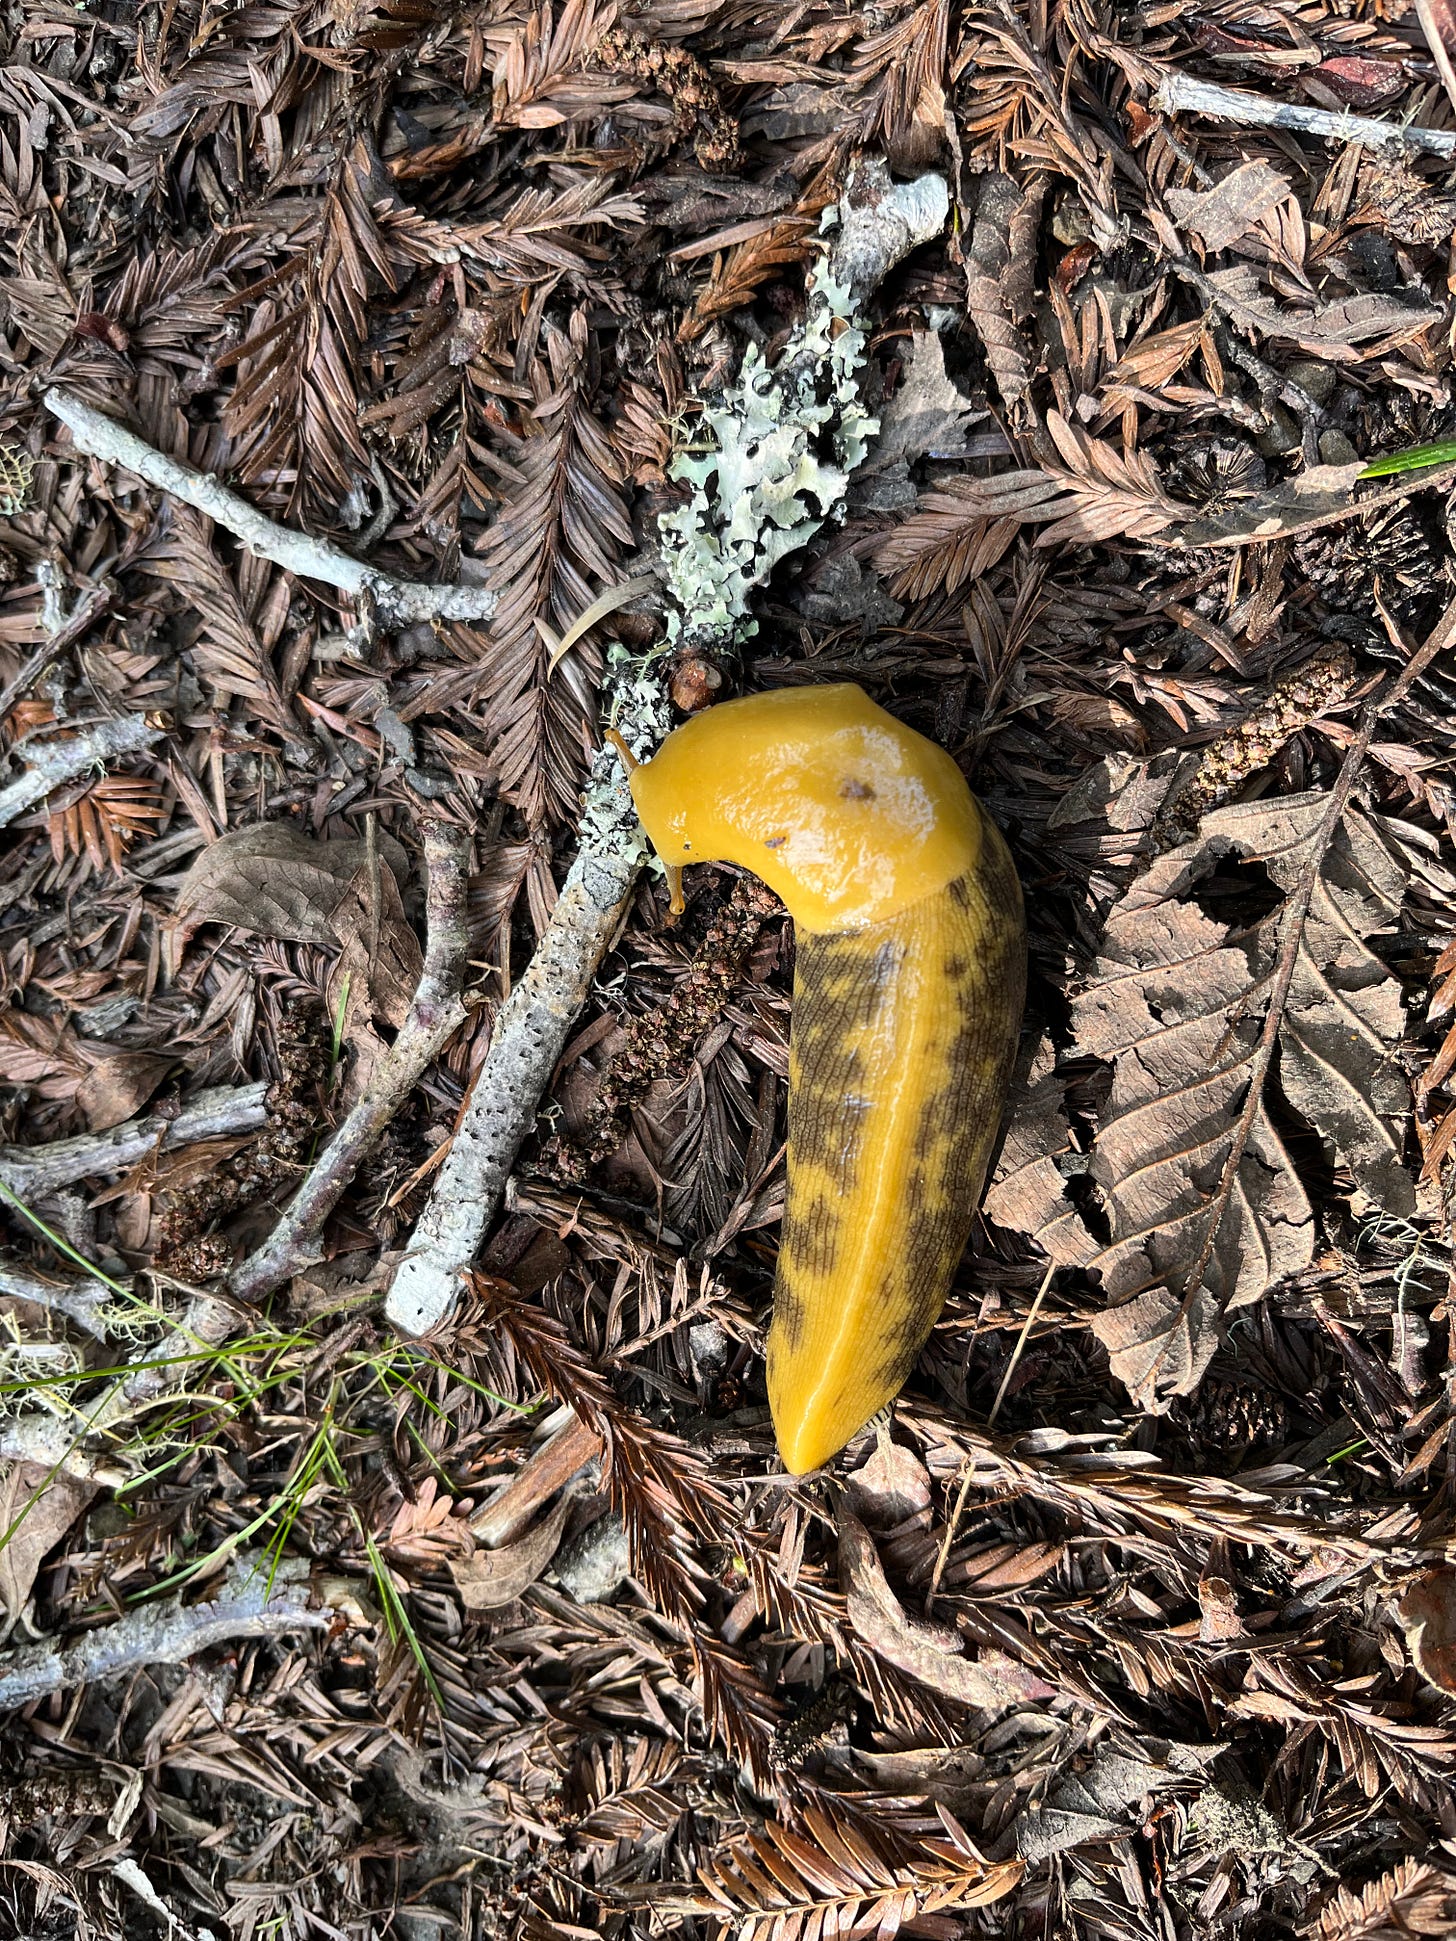 yellow-orange banana slug with its head over a stick covered in light green lichen